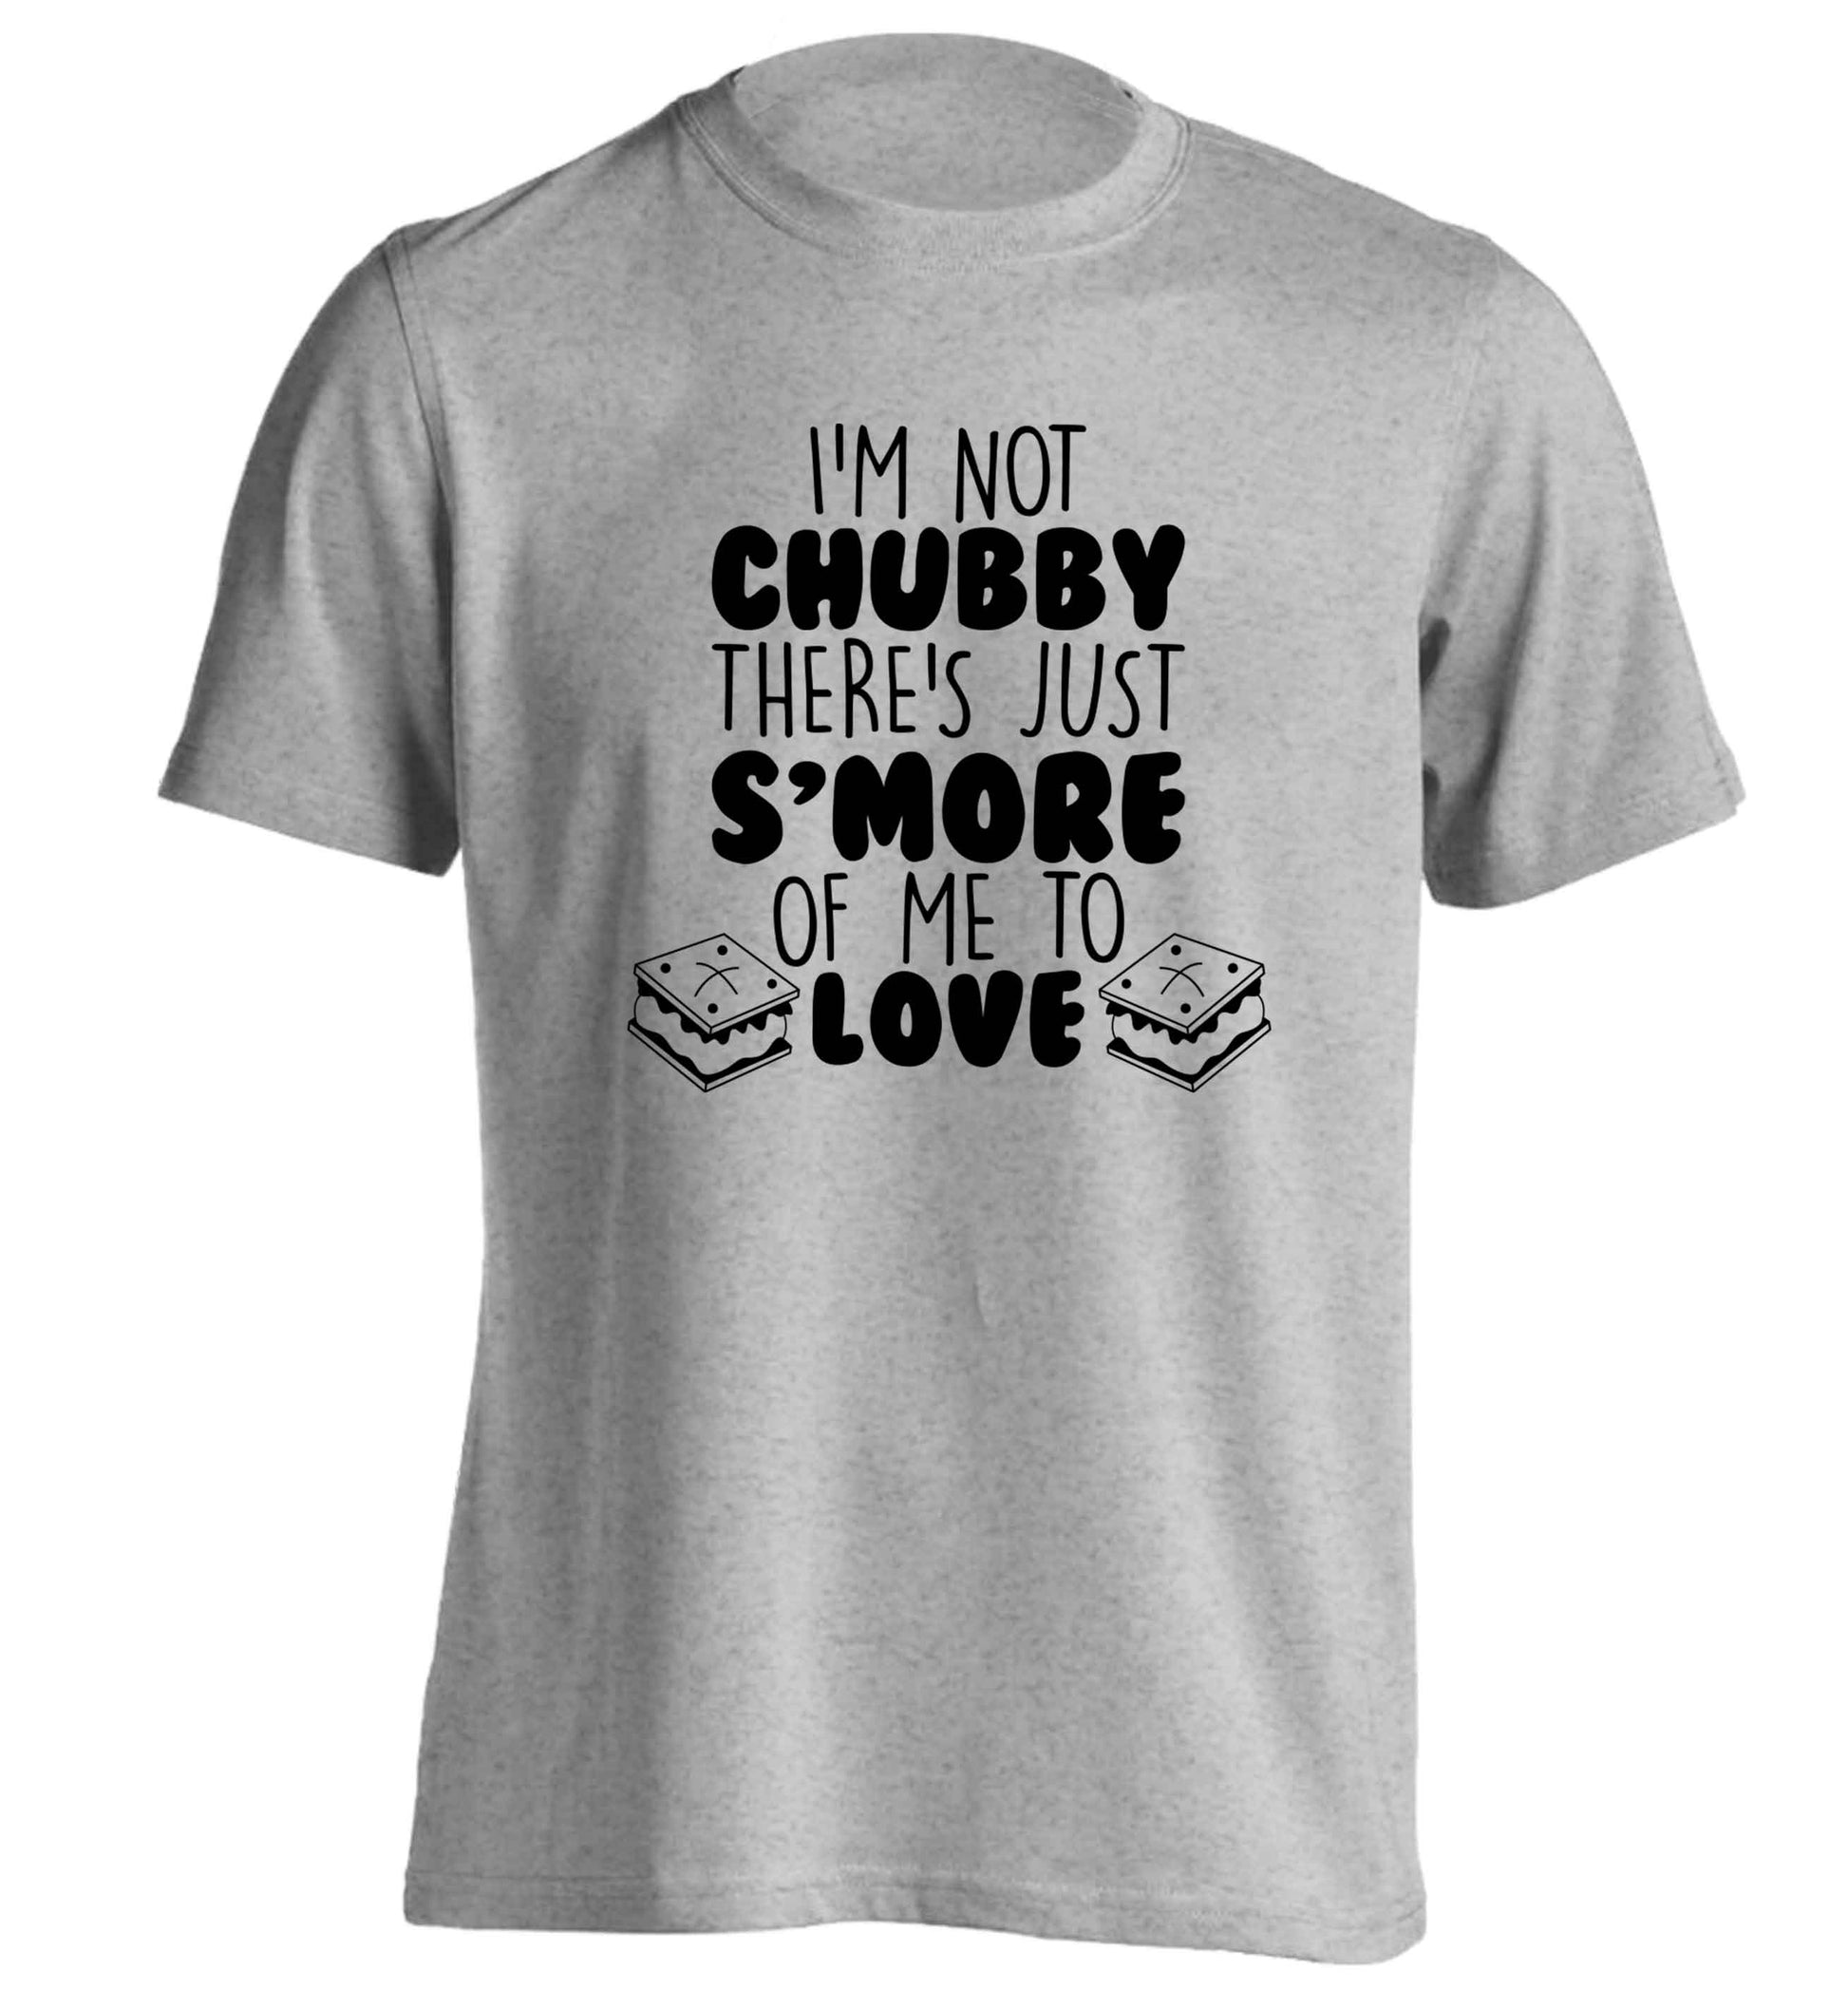 I'm not chubby there's just s'more of me to love adults unisex grey Tshirt 2XL